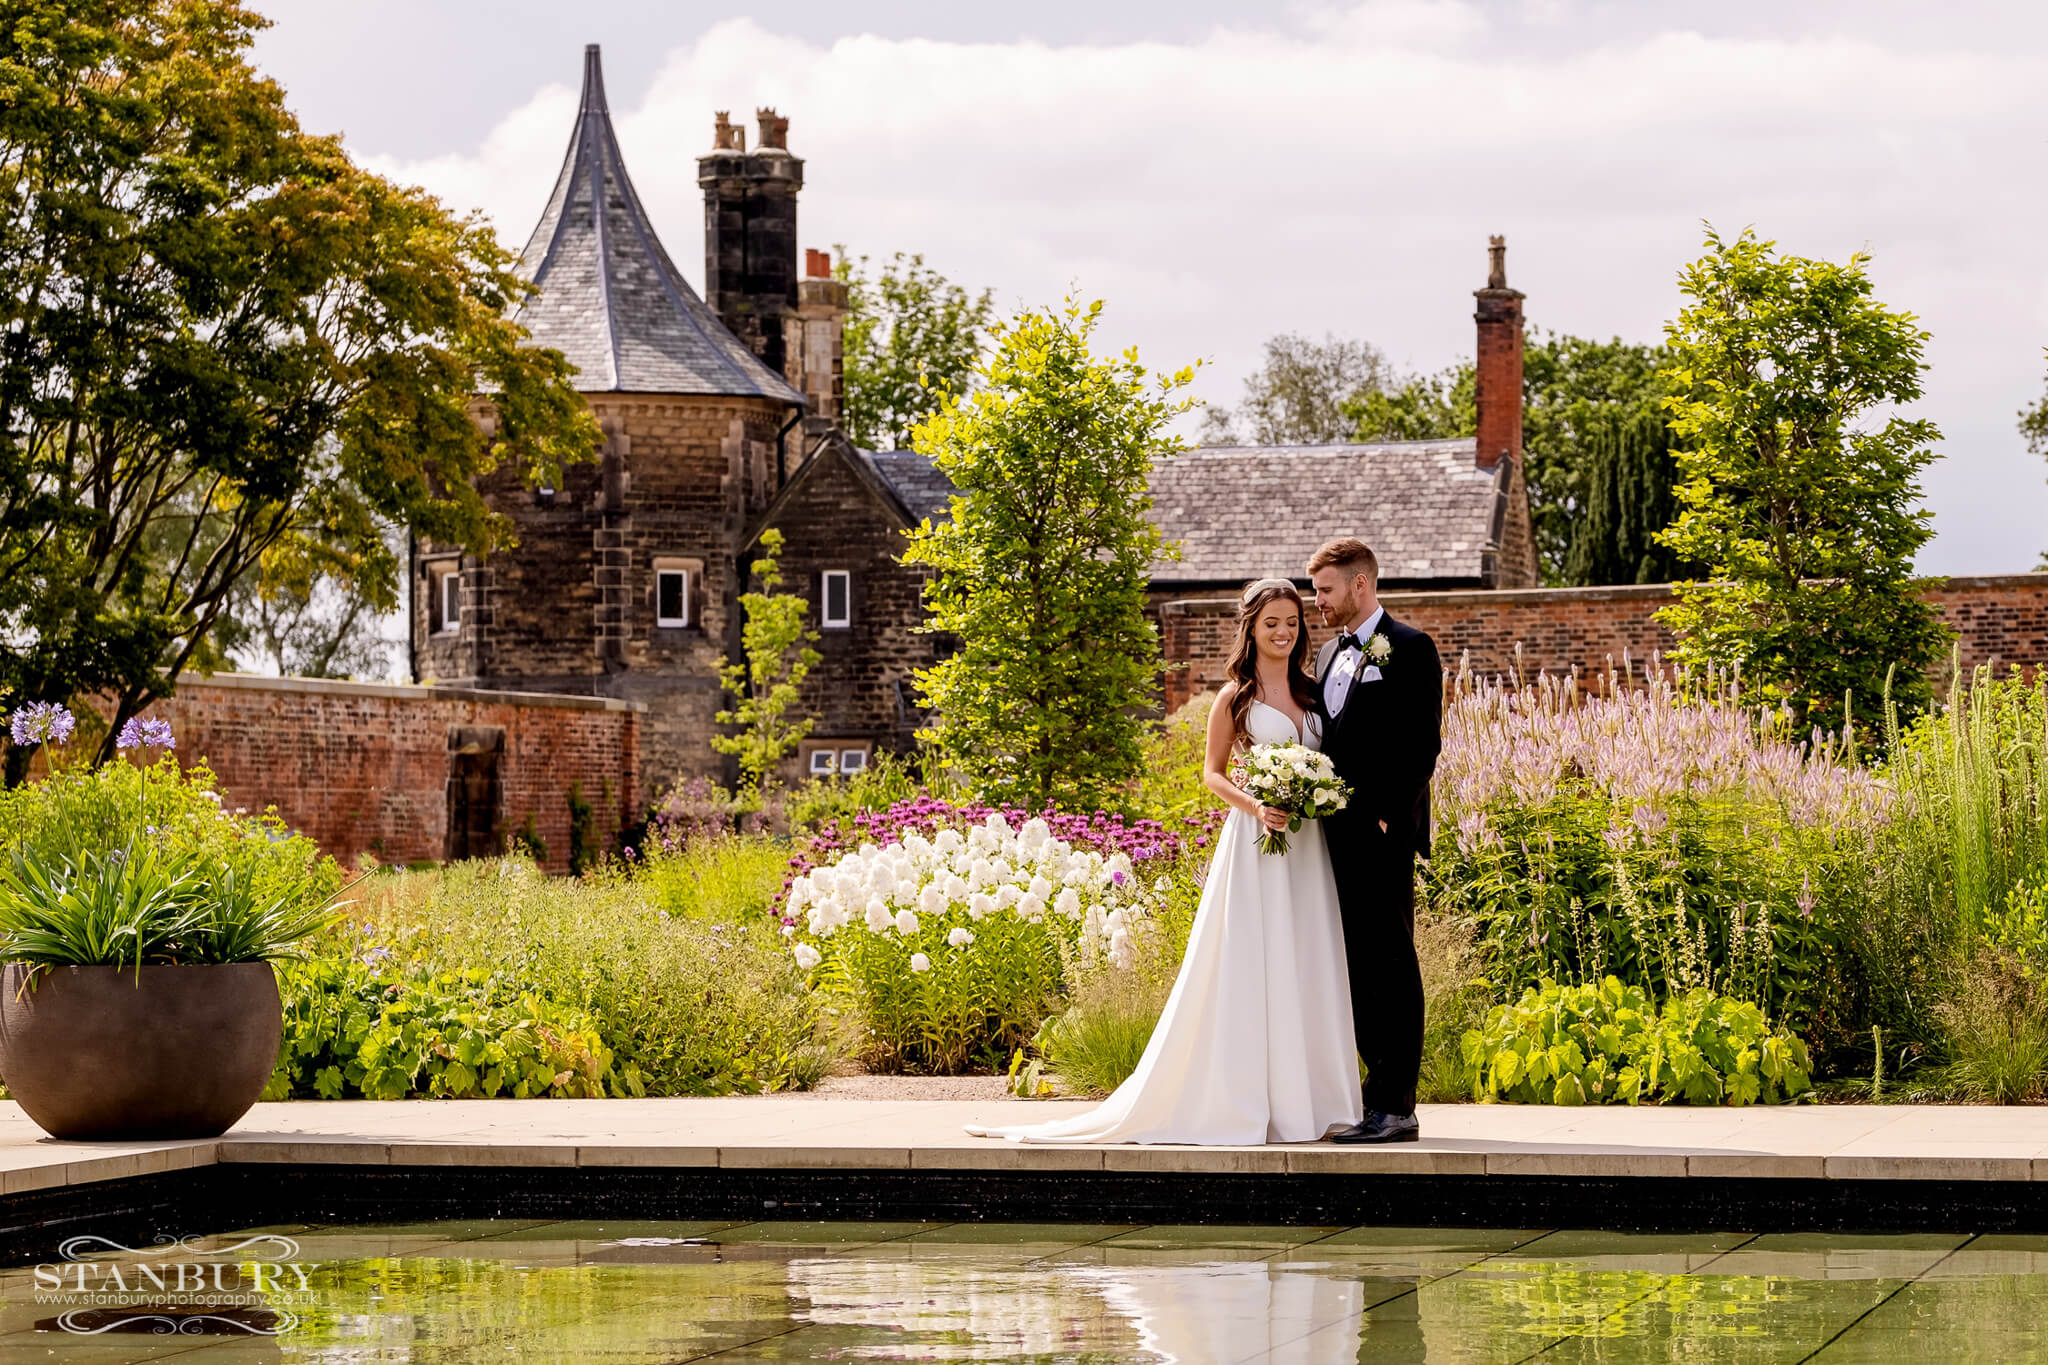 bride-and-groom-manchester-wedding-photographers-stanbury-photography